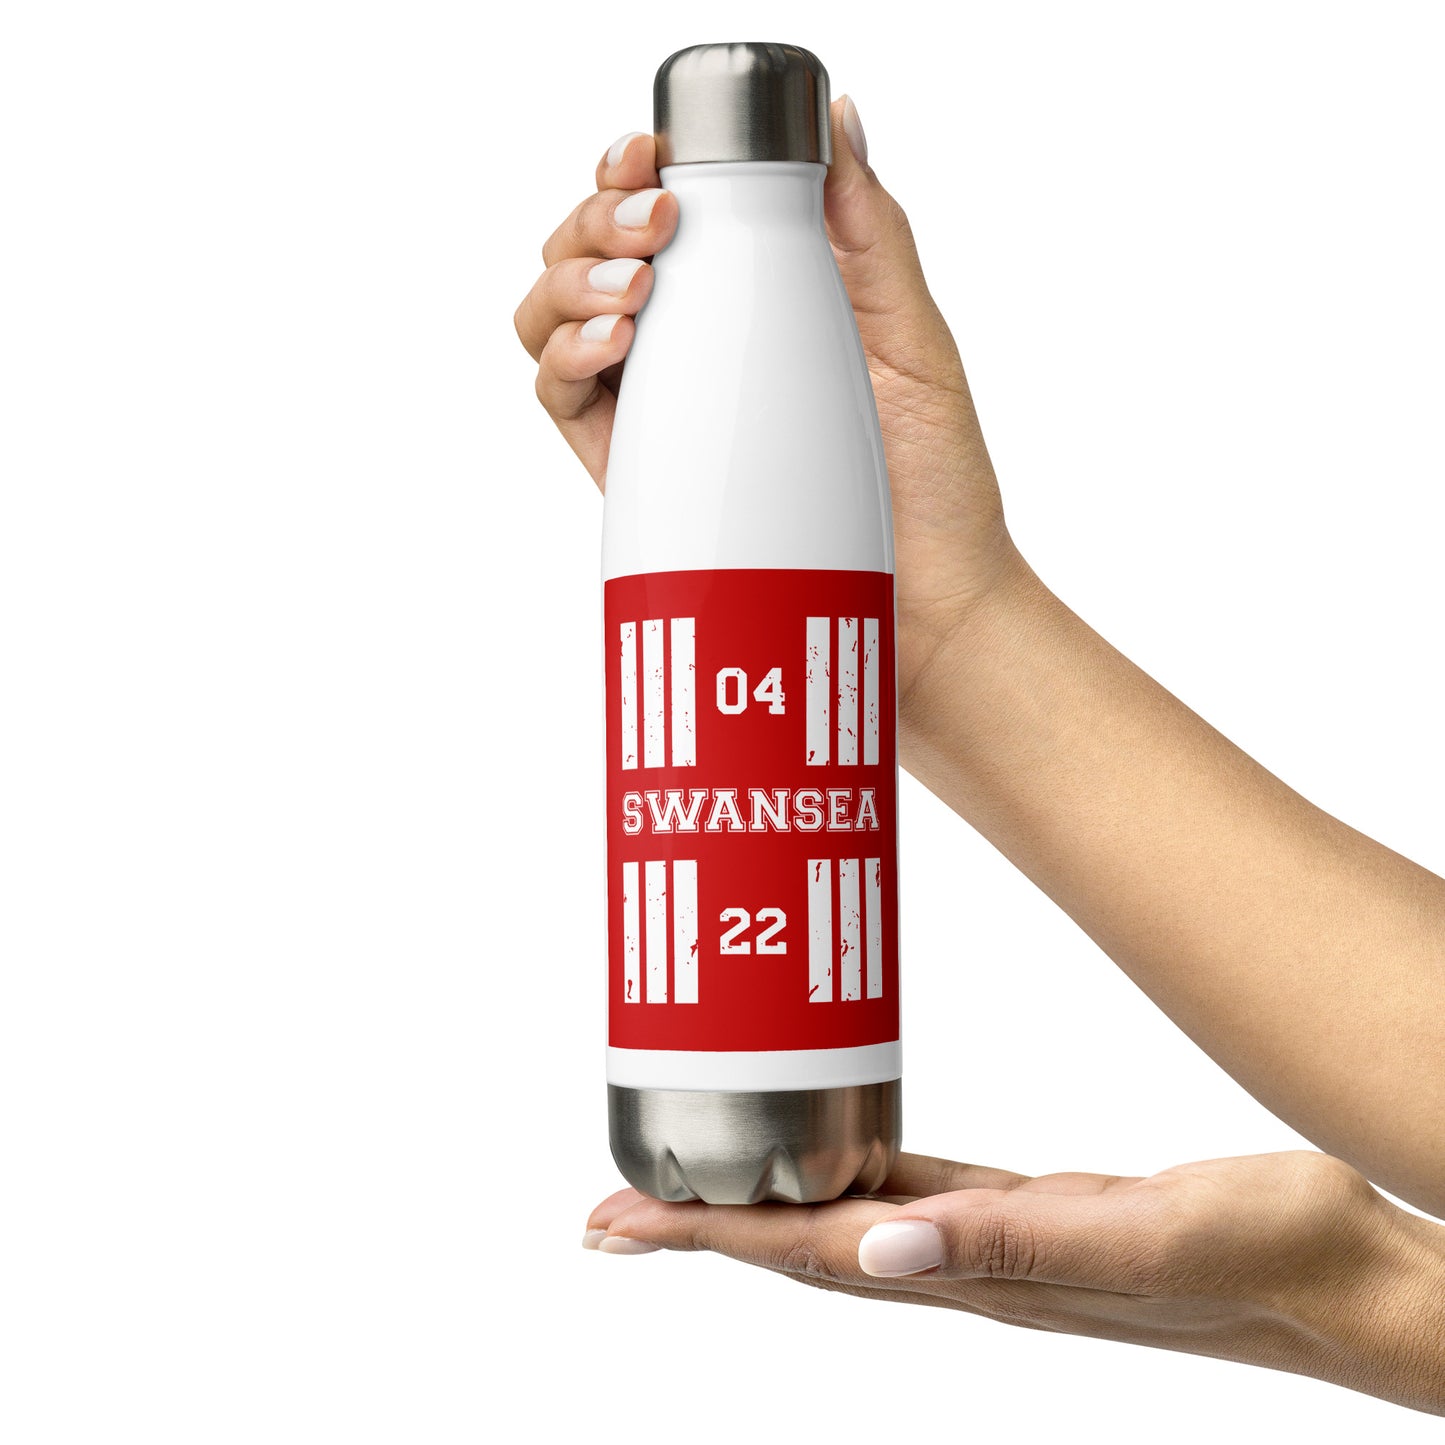 The Swansea Airport runway designator water bottle features a red print with the airport's name and designator framed by stylised threshold markings showing through.